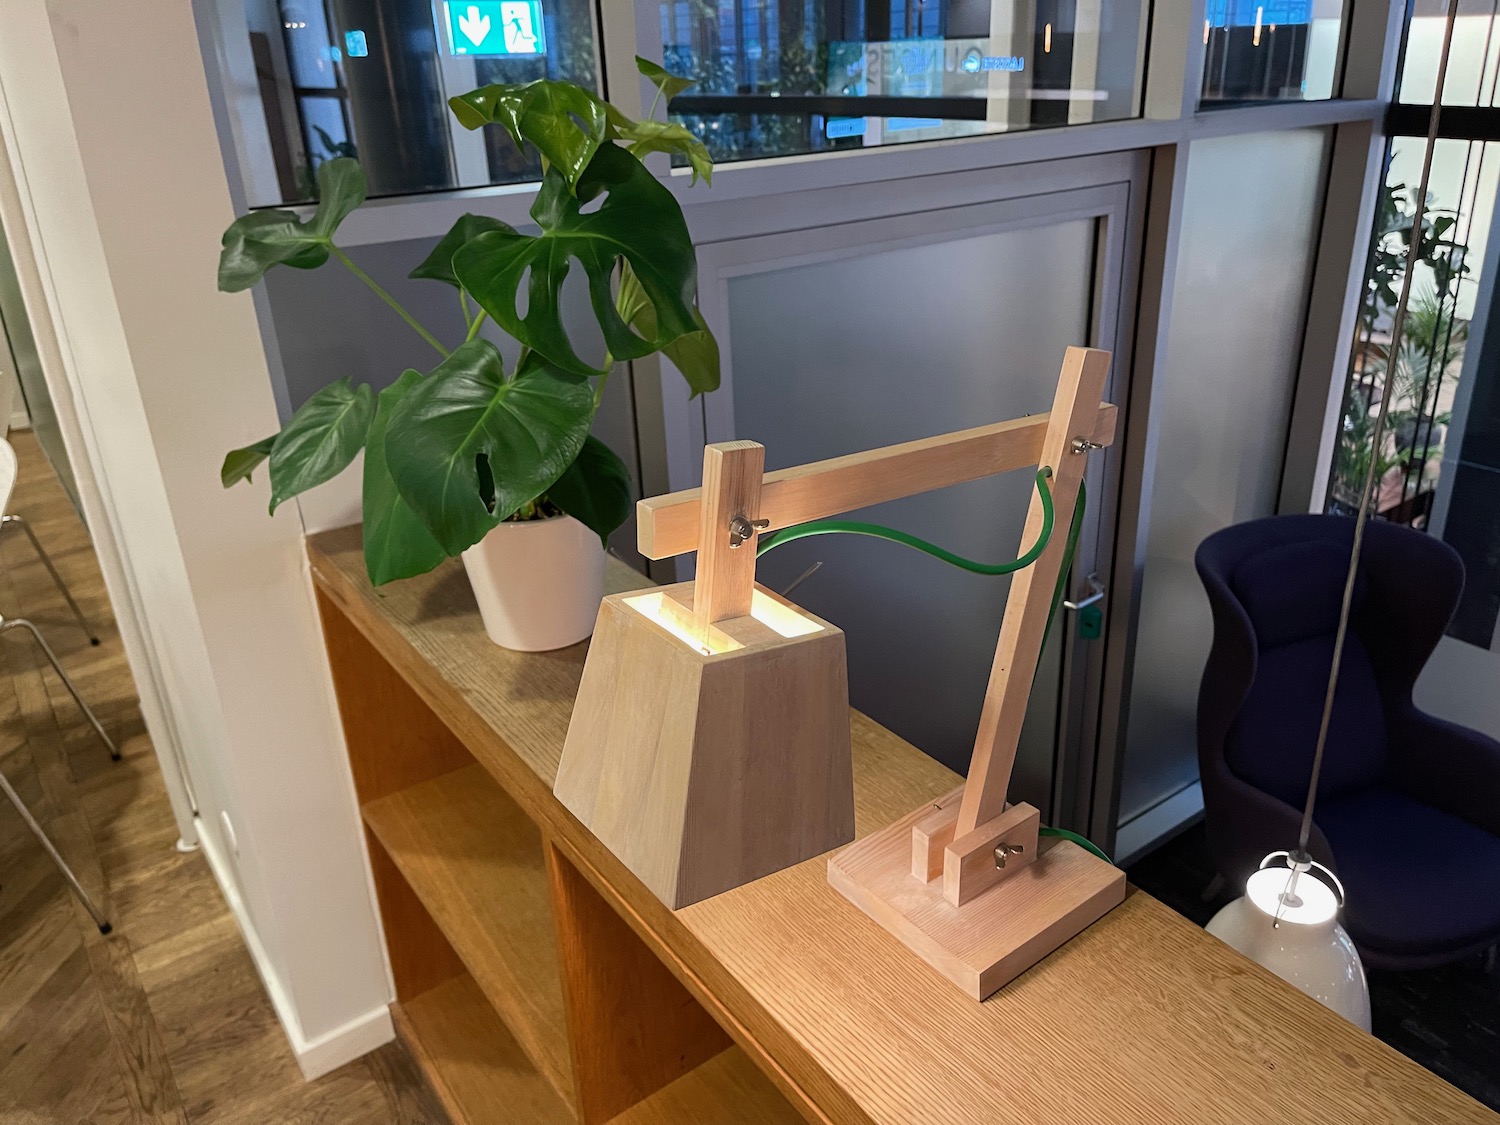 a wooden lamp and a plant on a shelf